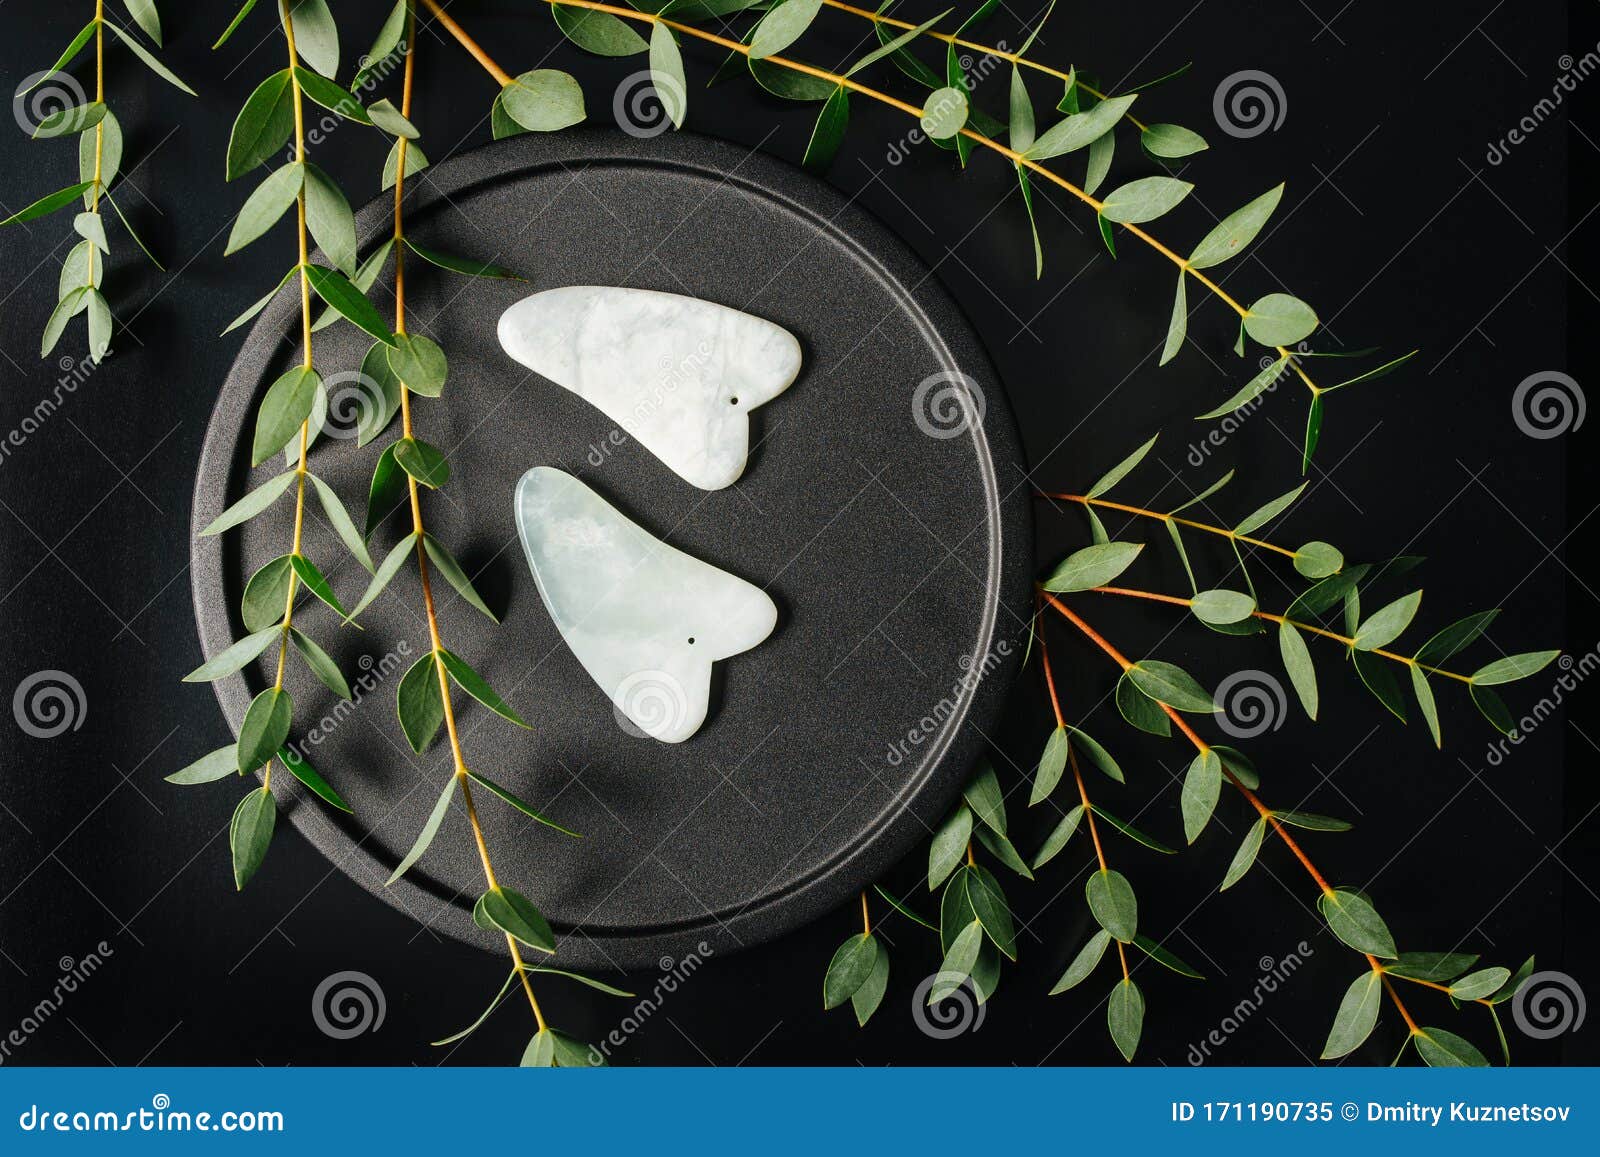 gua sha stones on a plate with eucalyptus branches over black. top view